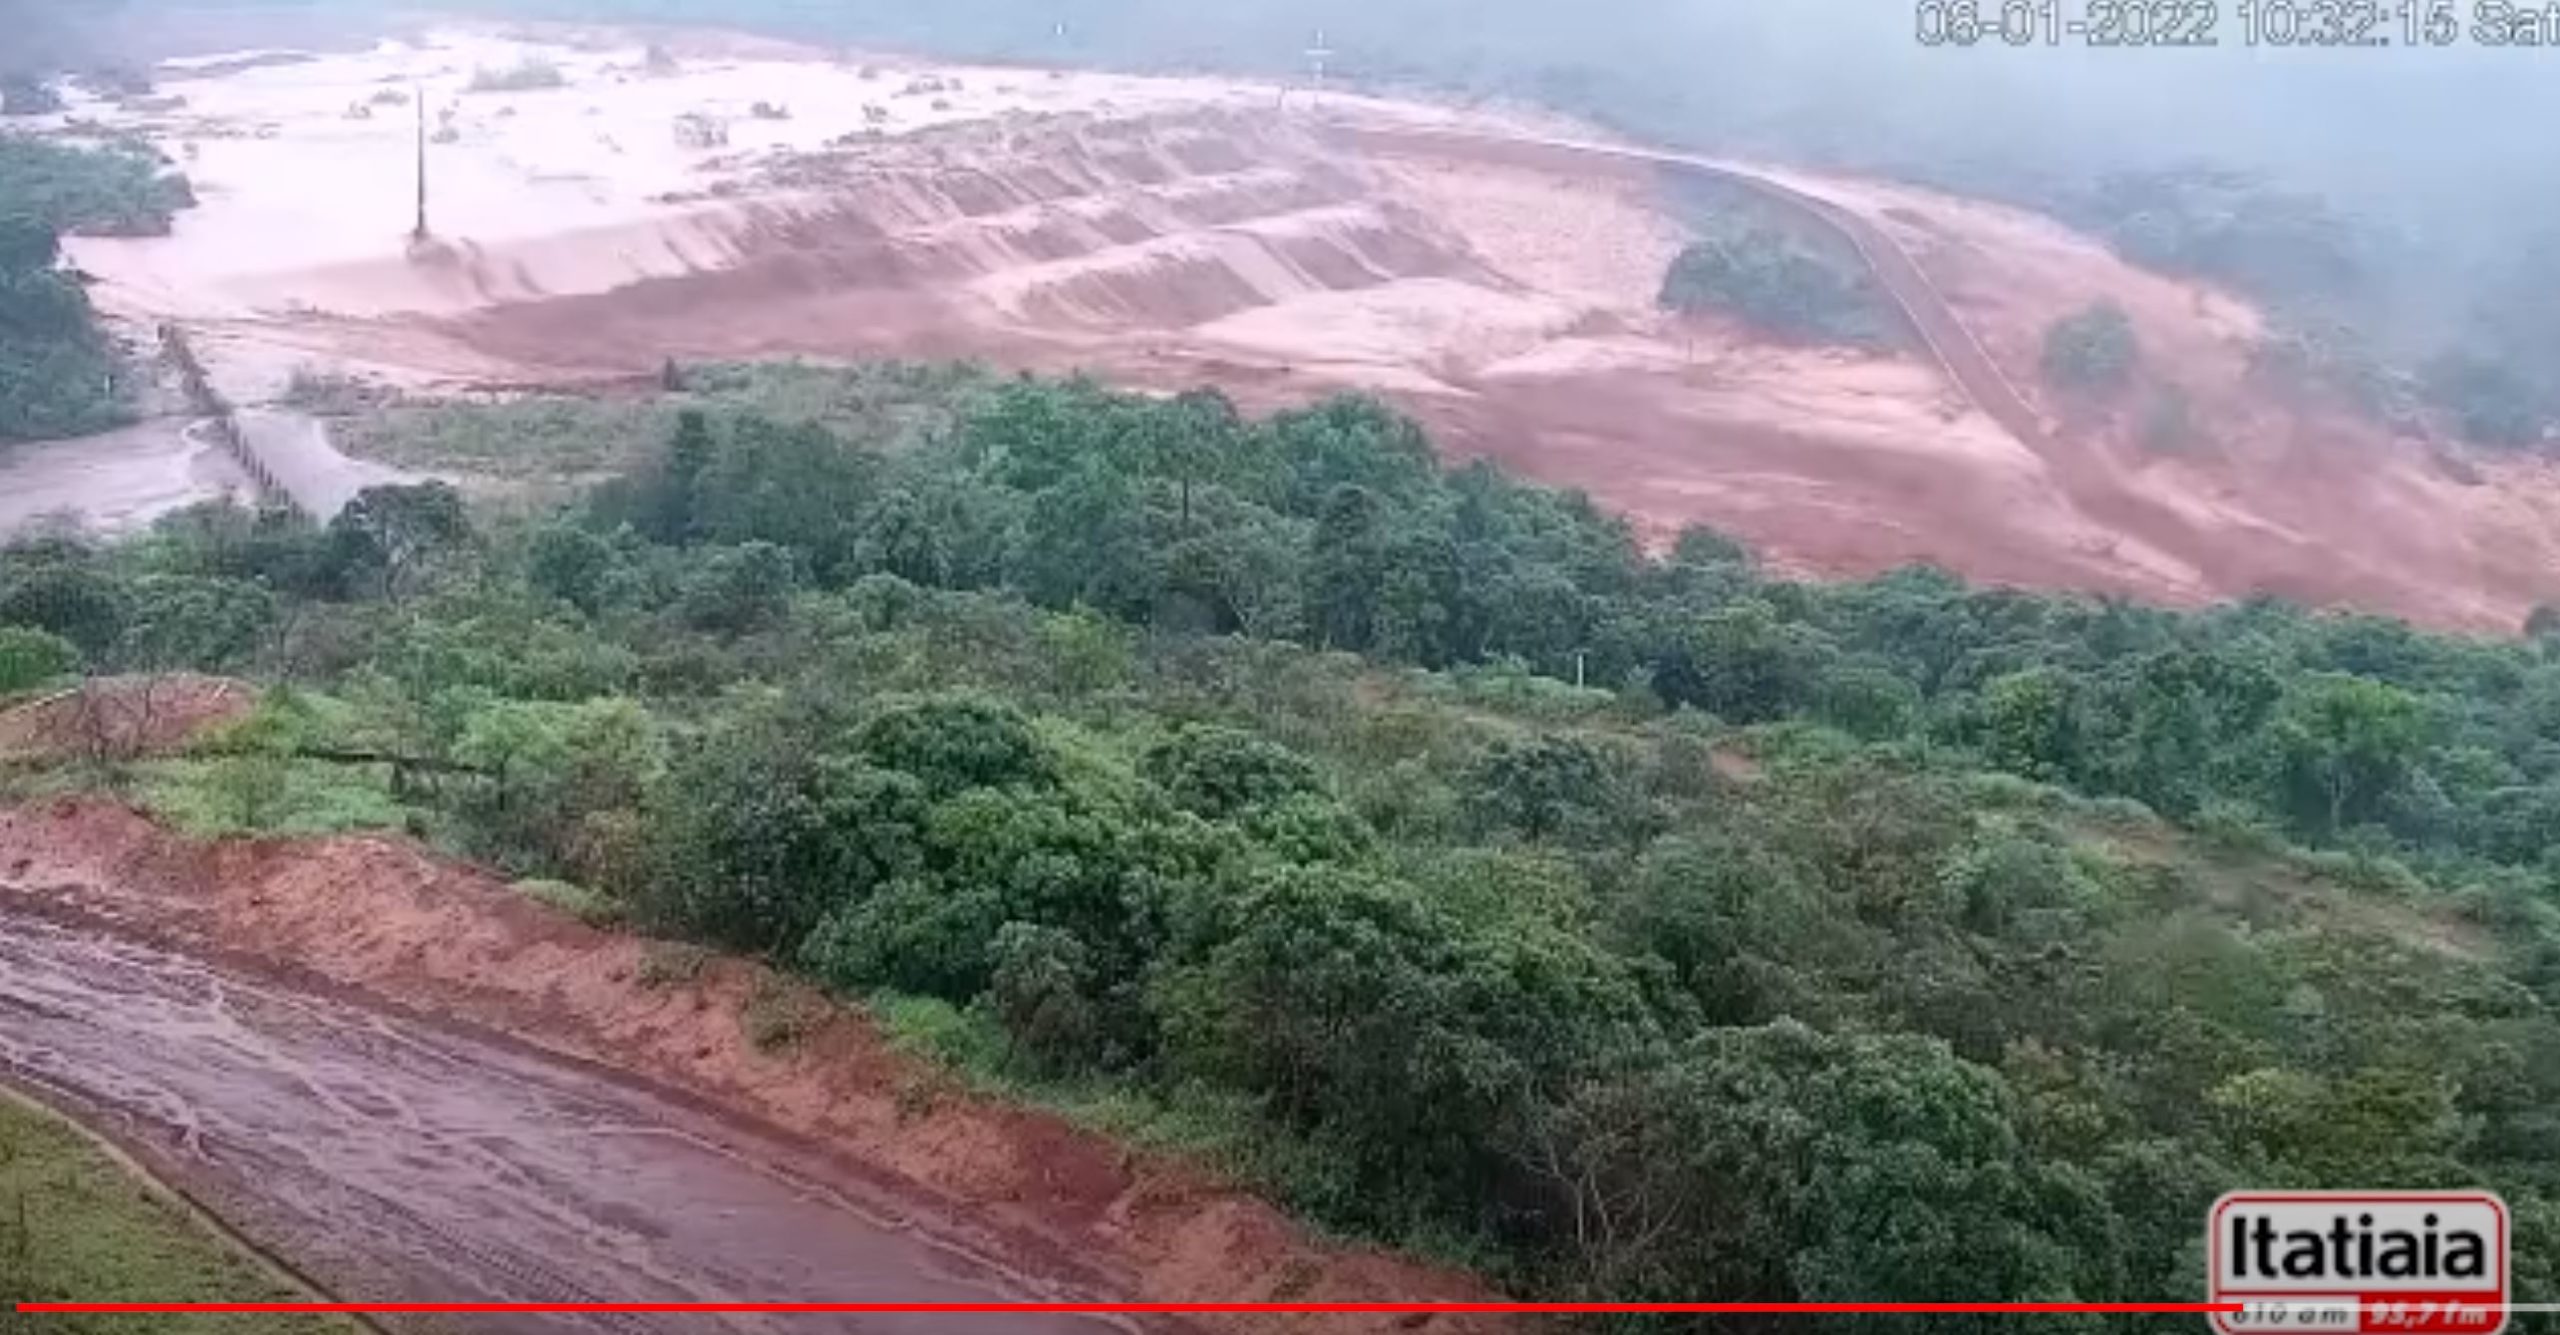 A still from the video of the overtopping of the small dam caused by the Pau Branco landslide. 